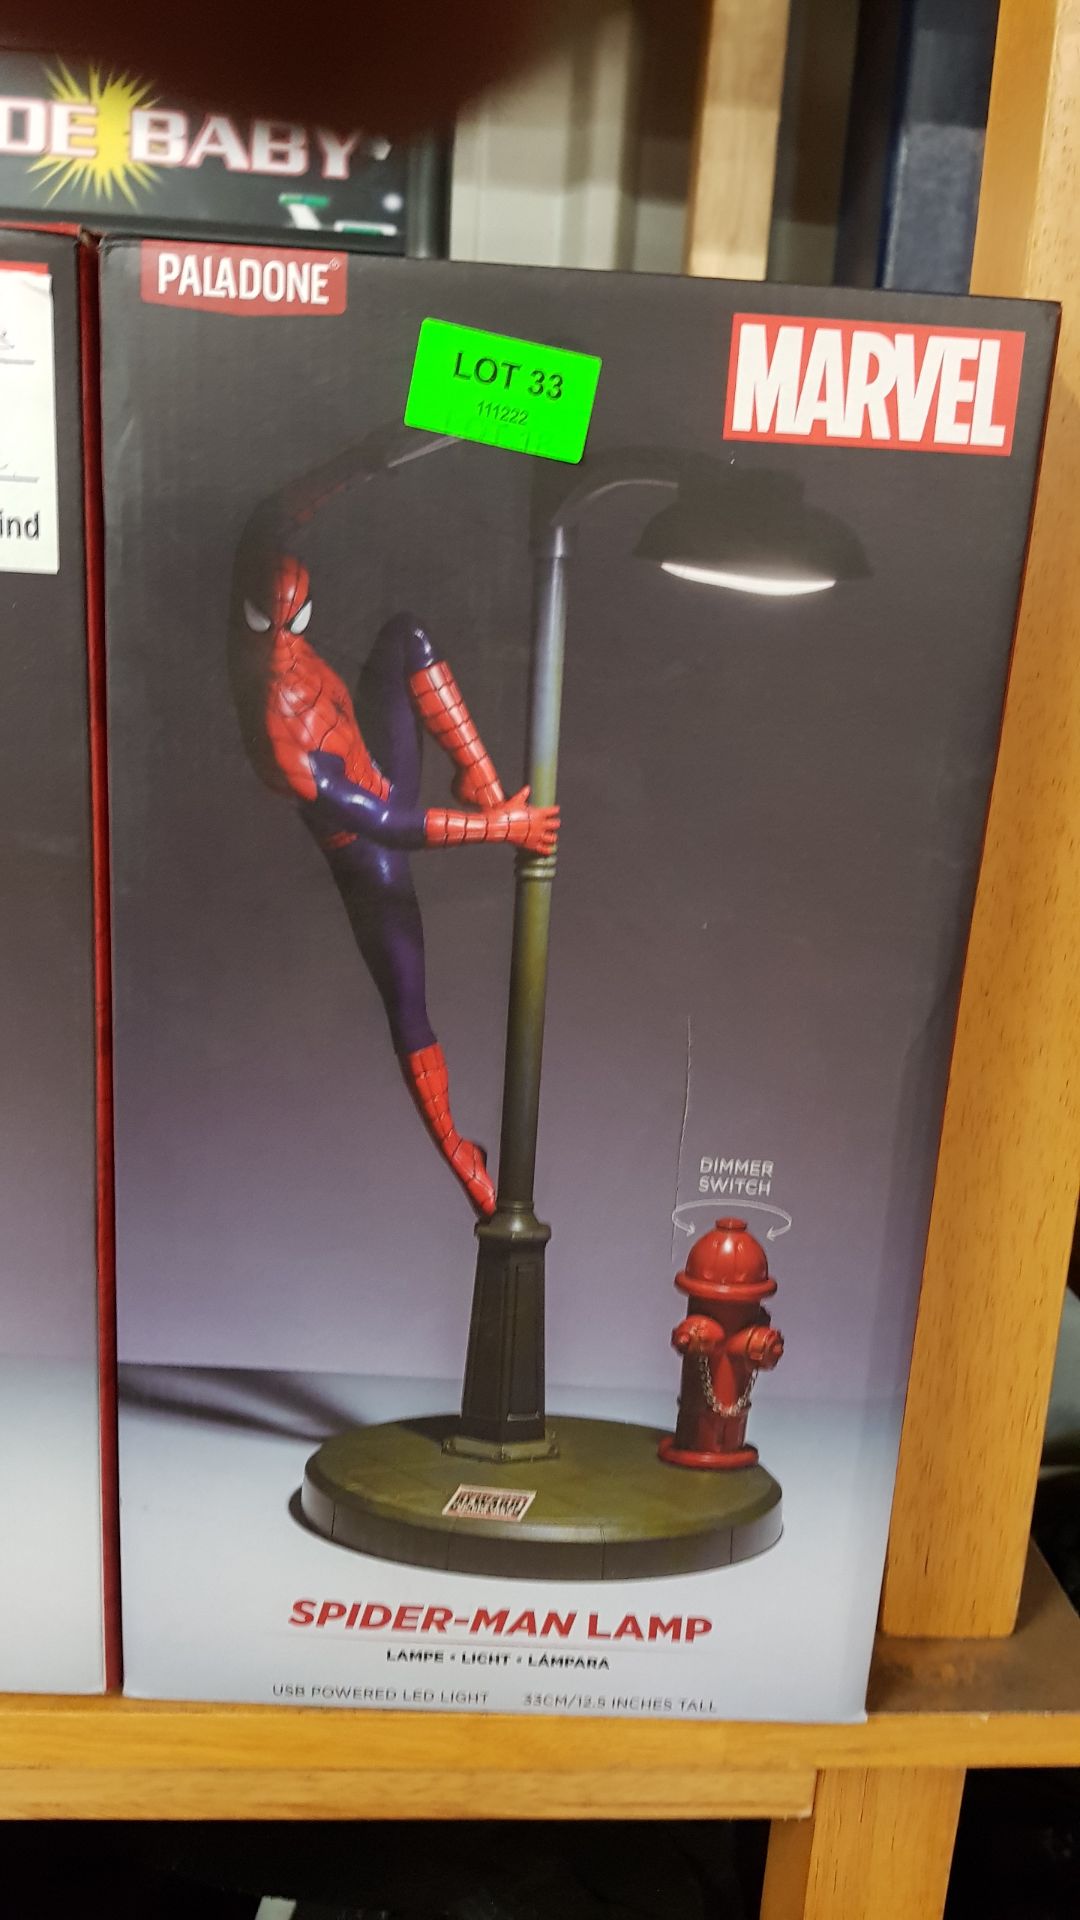 (33/R9) Lot RRP £118. 2x Marvel Spiderman Figurine Desk Lamp RRP £59 Each. (All Units Have Return... - Image 5 of 5